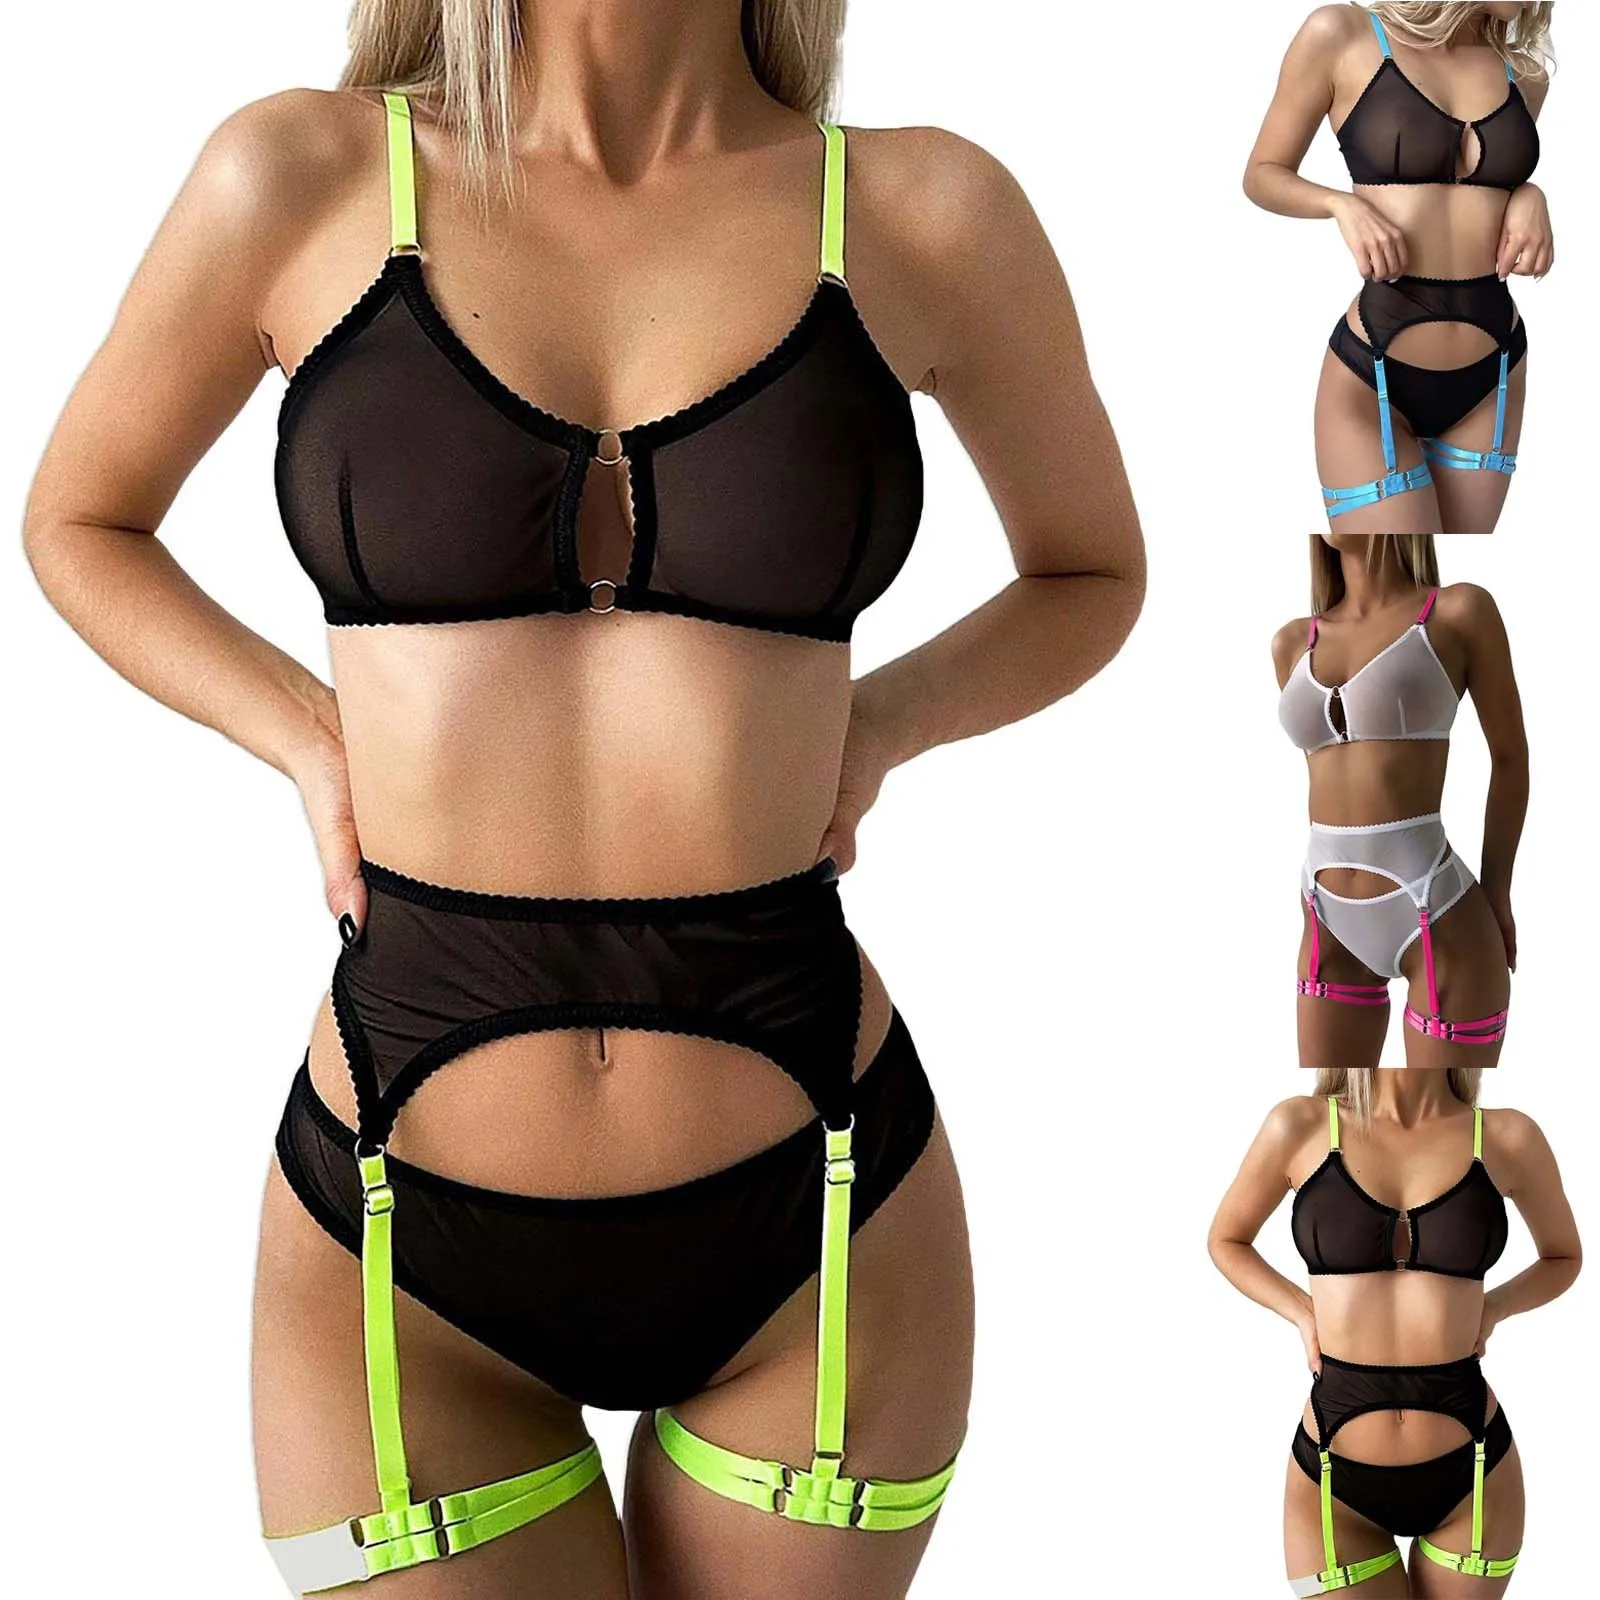 Women Underwire Lingerie Set with Garter Belt Push Up Bra and Panty Set  with Stockings